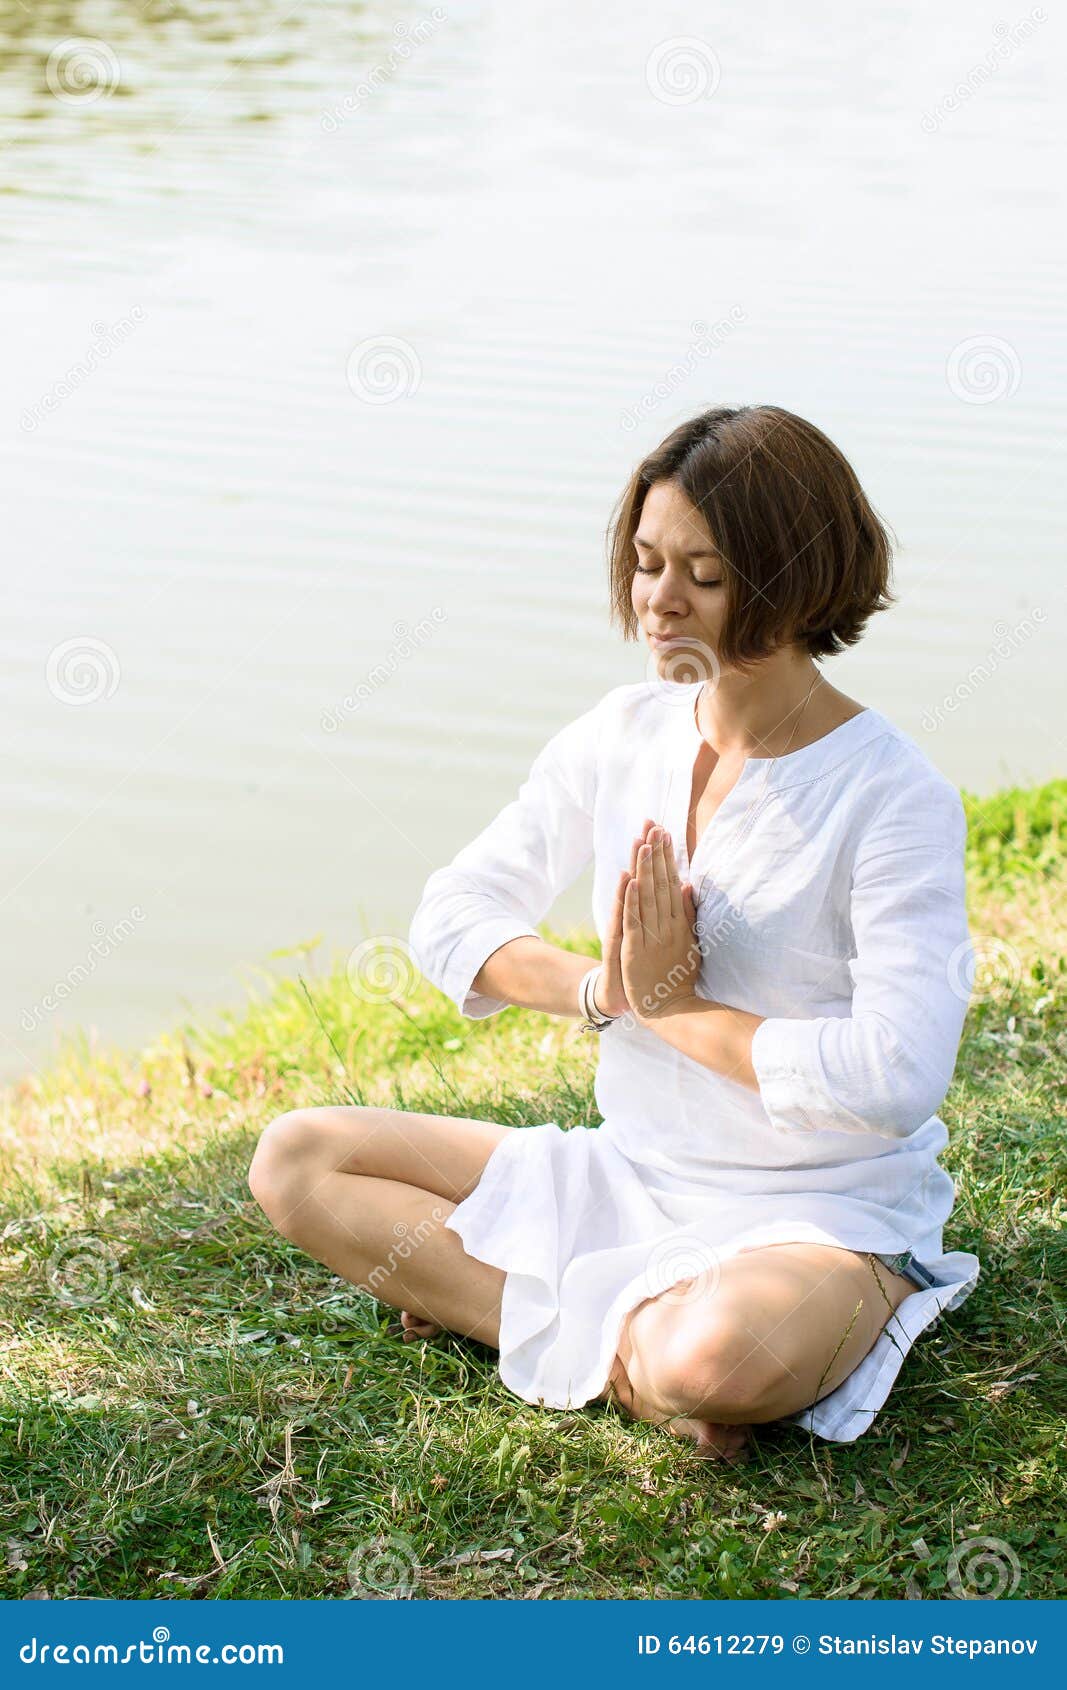 woman meditating in easy pose on the grass at the river-bank.